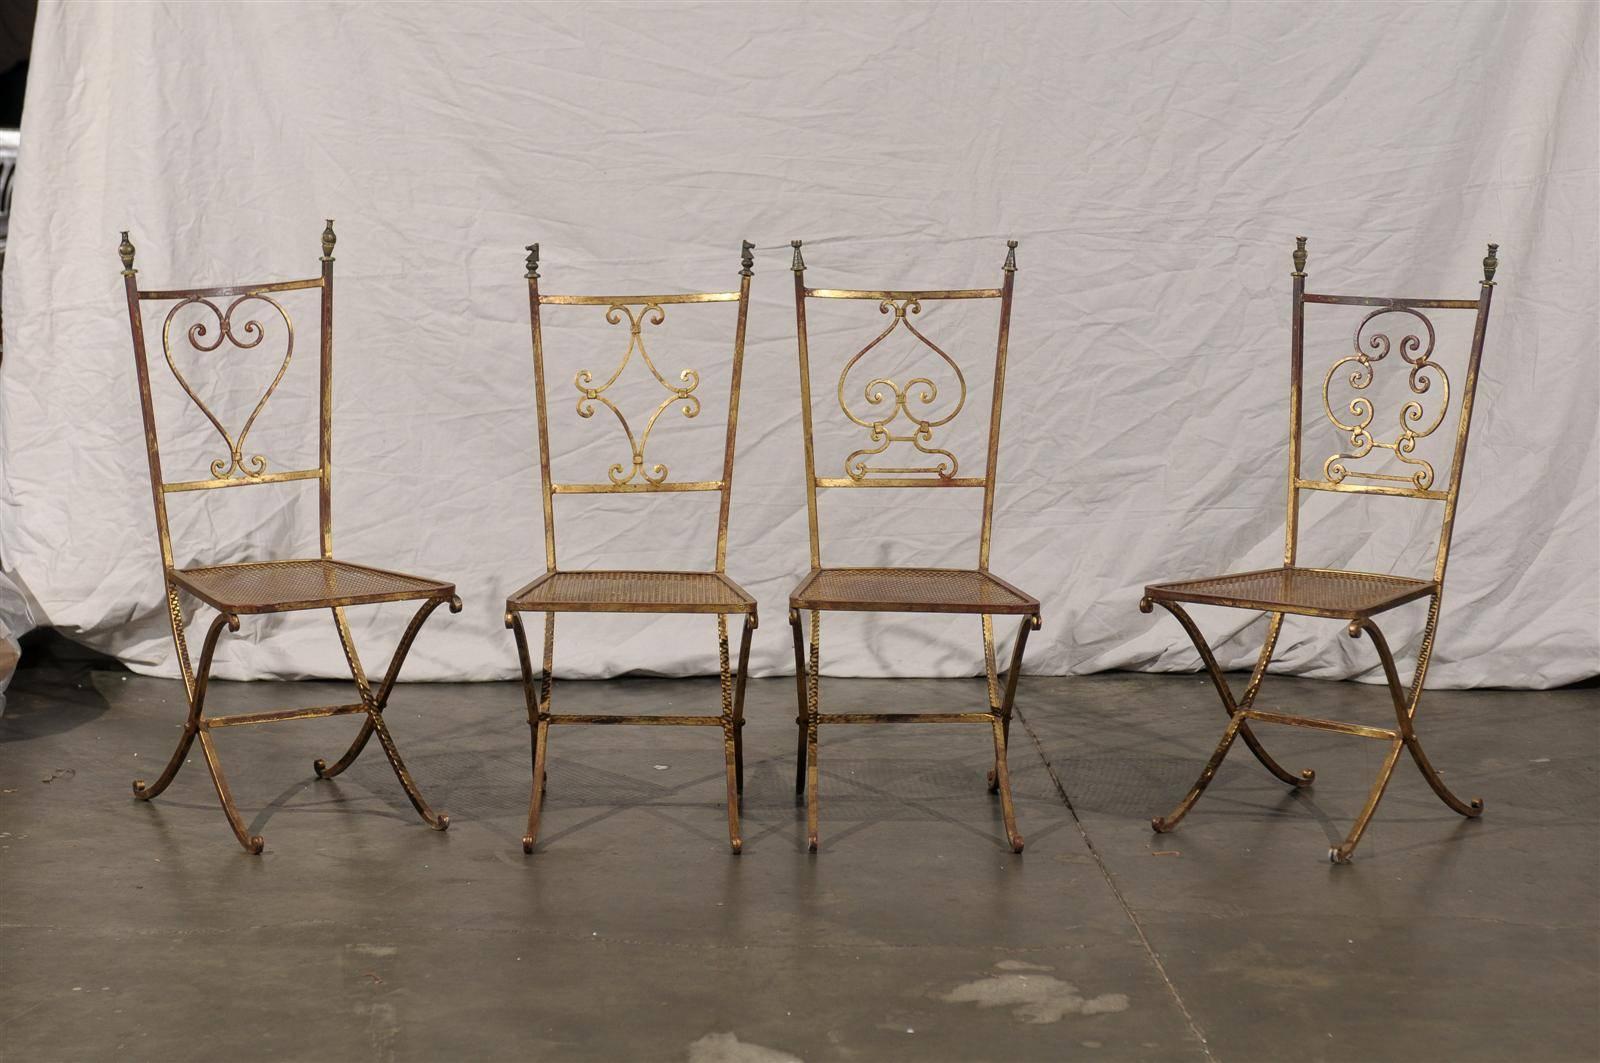 Set of four 20th century French gilt metal chairs, cast bronze chessman finials.
Back splats are heart, diamond, spade and club
Whimsical Mid-20th Century card chairs featuring heart, diamond, spade, and club backs. Great condition
Seat